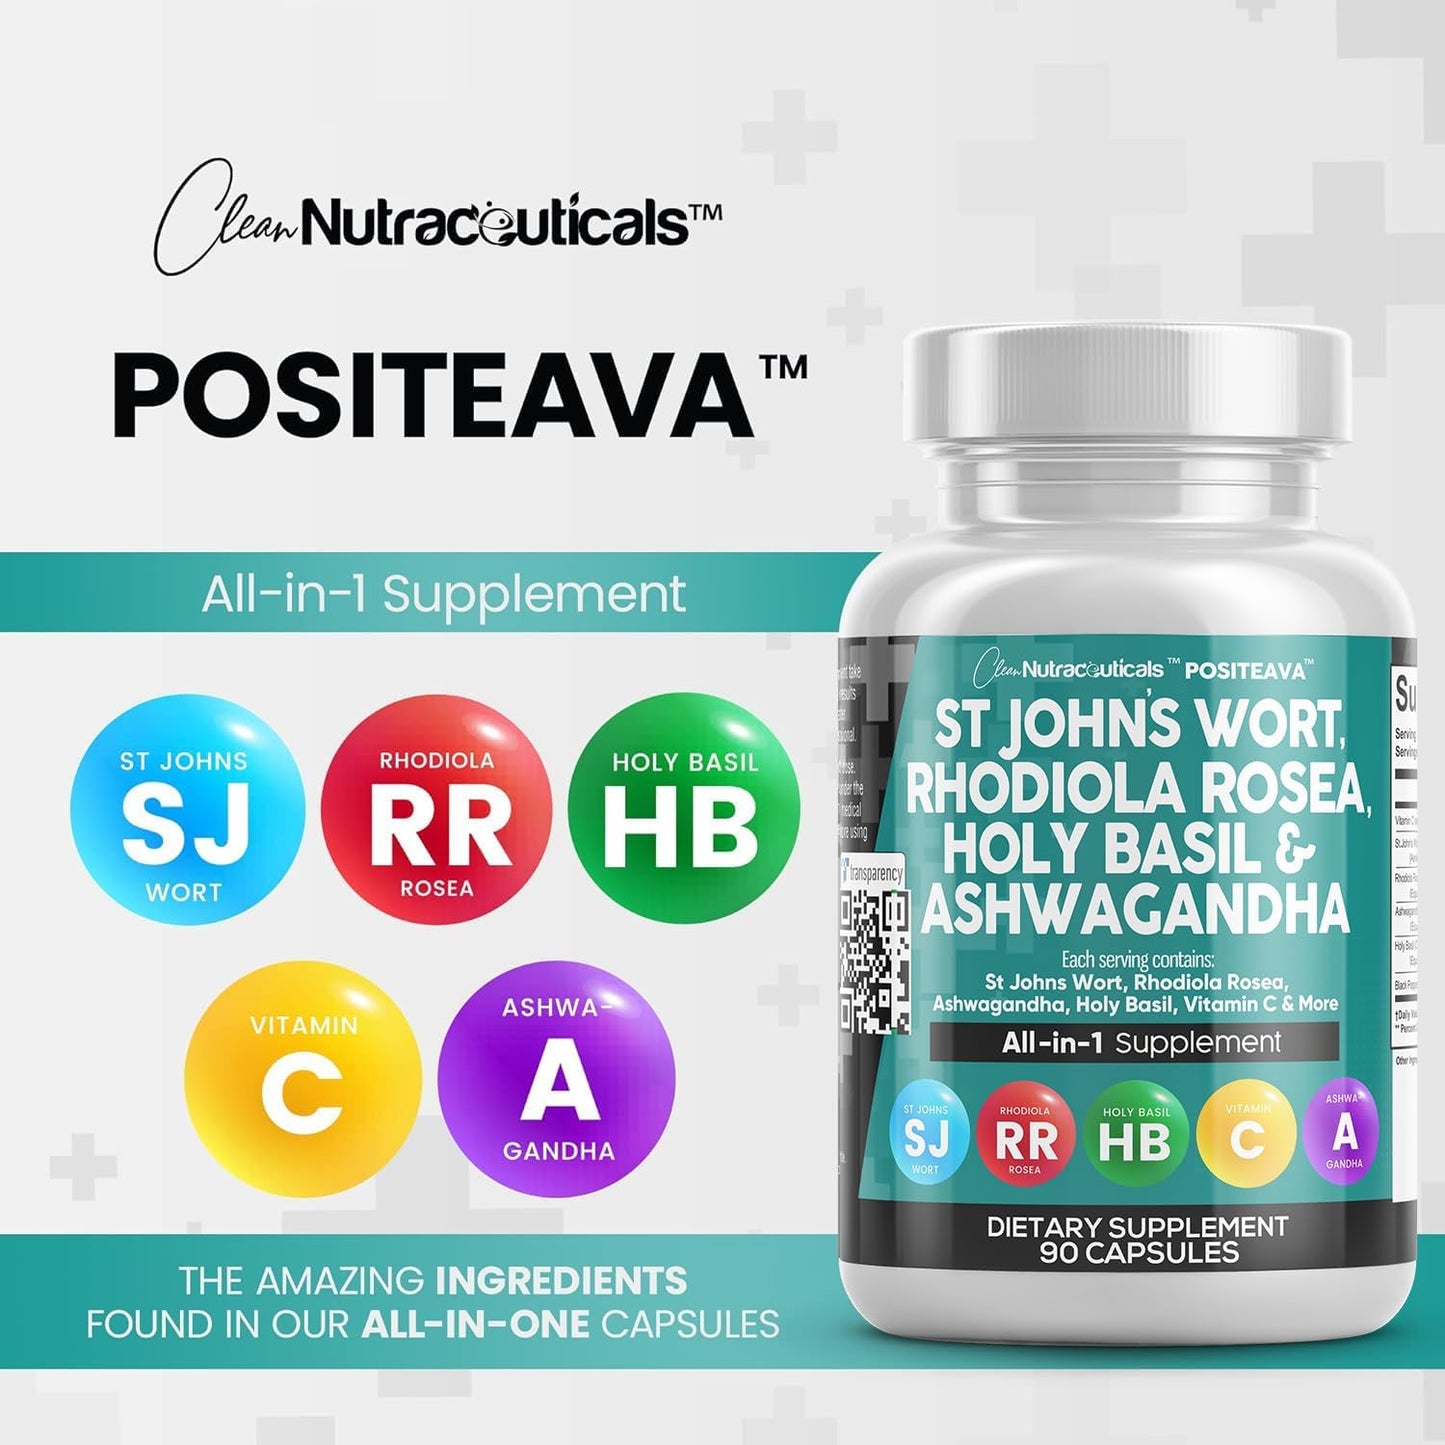 St Johns Wort 10000Mg Rhodiola Rosea 20000Mg Holy Basil 3000Mg Ashwagandha 6000Mg - Mood Support for Women and Men with Vitamin C & Black Pepper Extract - 90 Caps